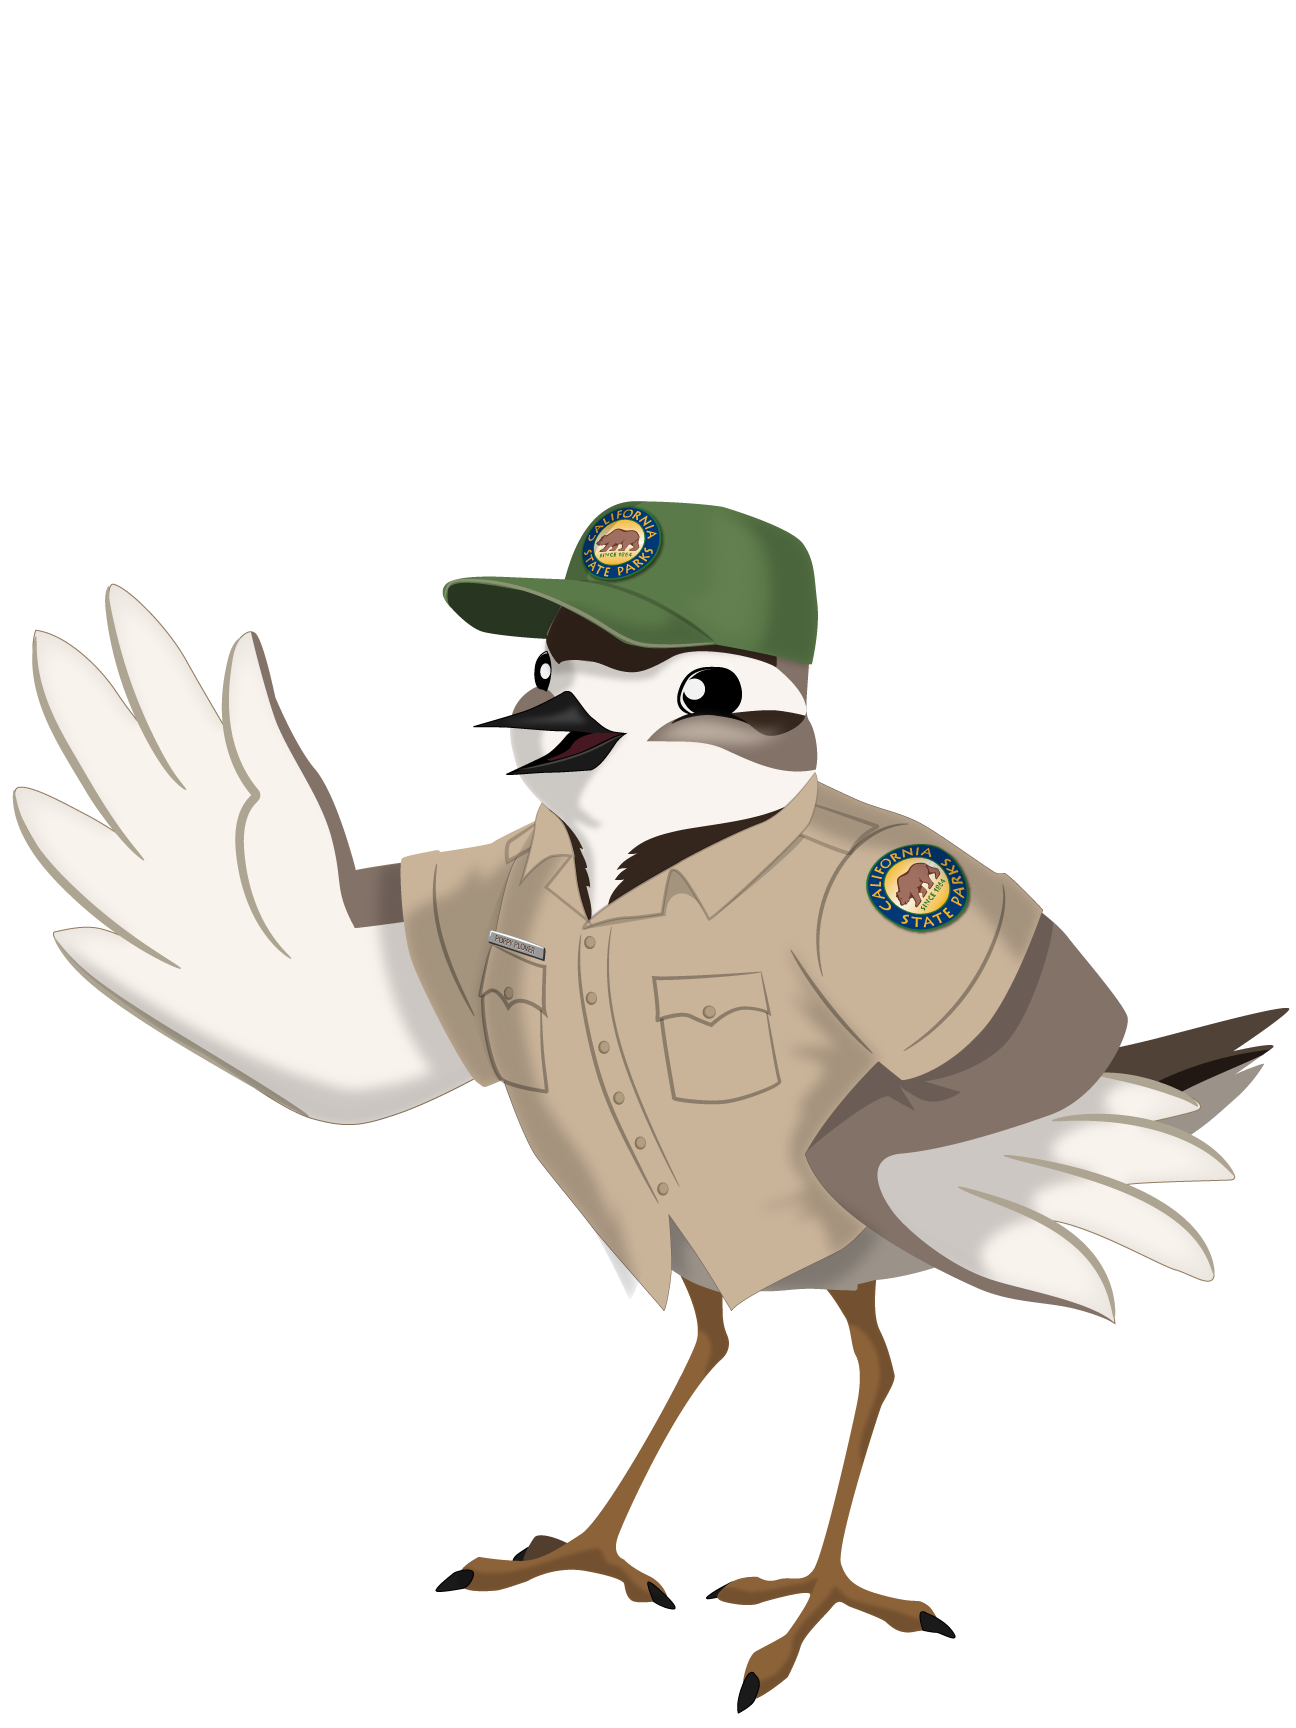 Cartoon Snowy Plover bird in State Park Uniform waving with feathered wing.